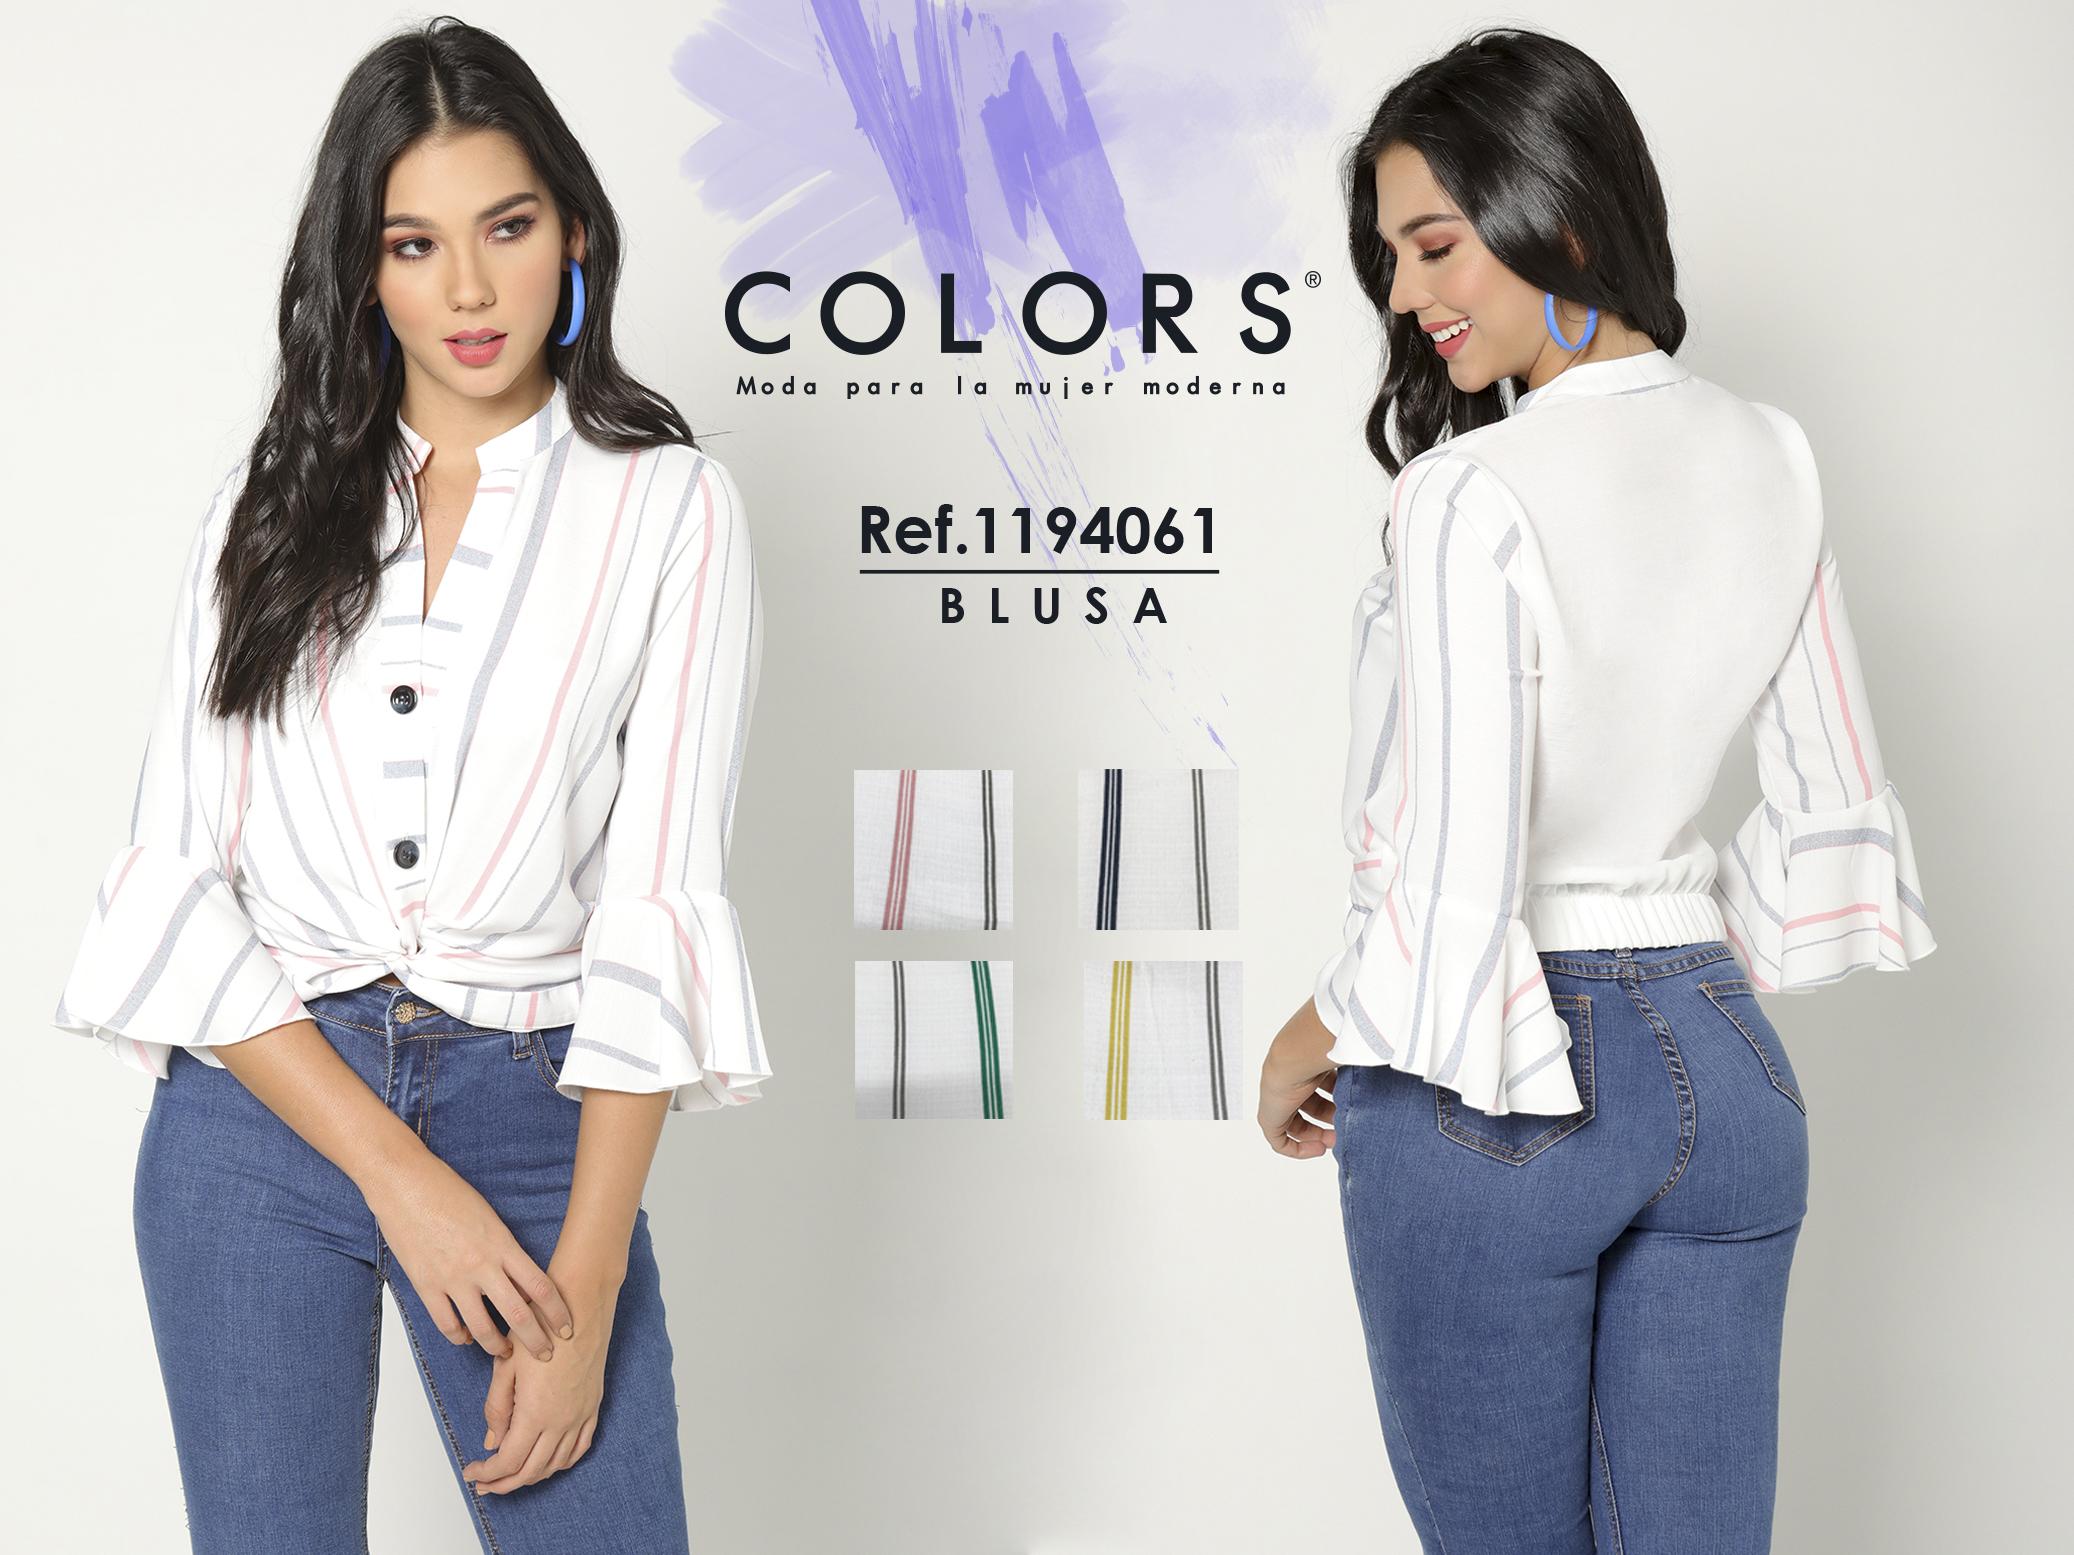 White blouse type shirt with sleeve up to the forearm with white background and decorated with vertical stripes of varied colors